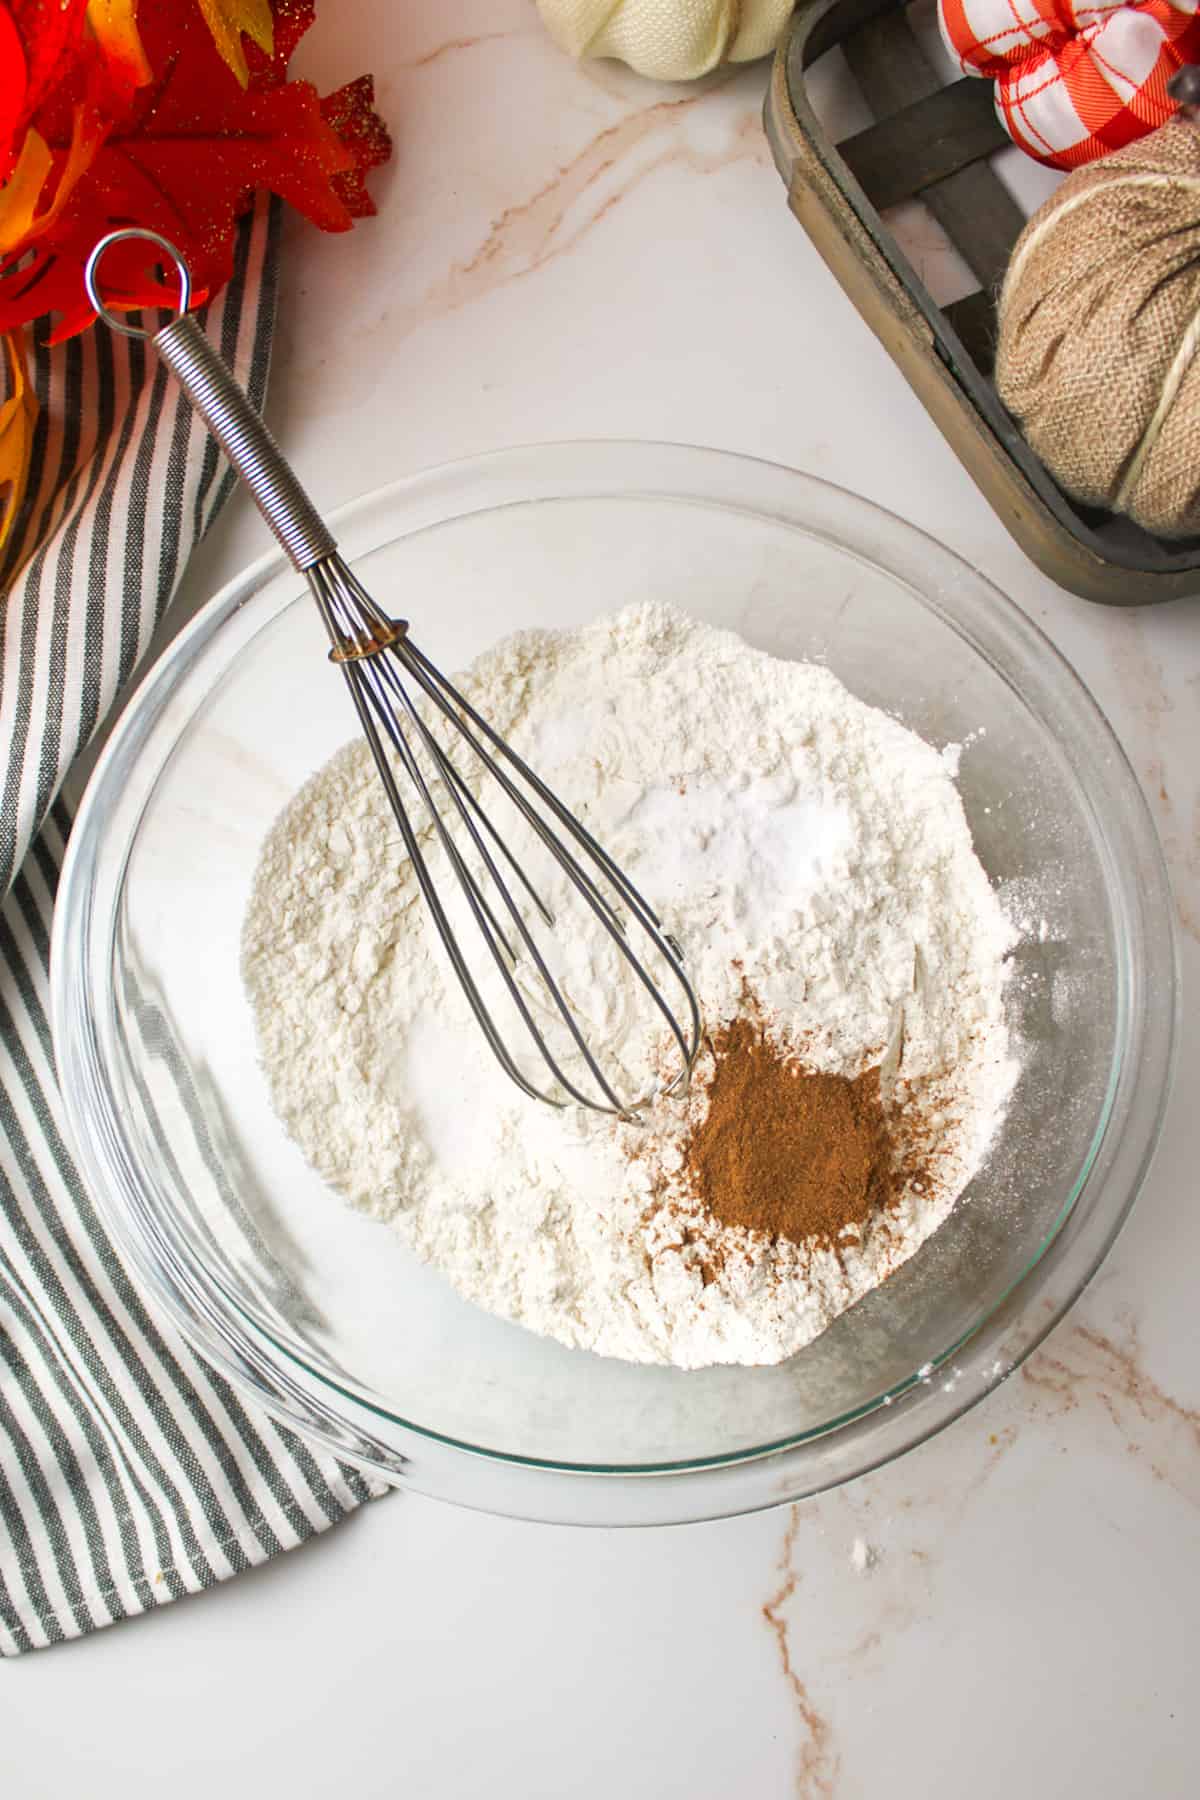 dry ingredients for cookies in a mixing bowl with a whisk.